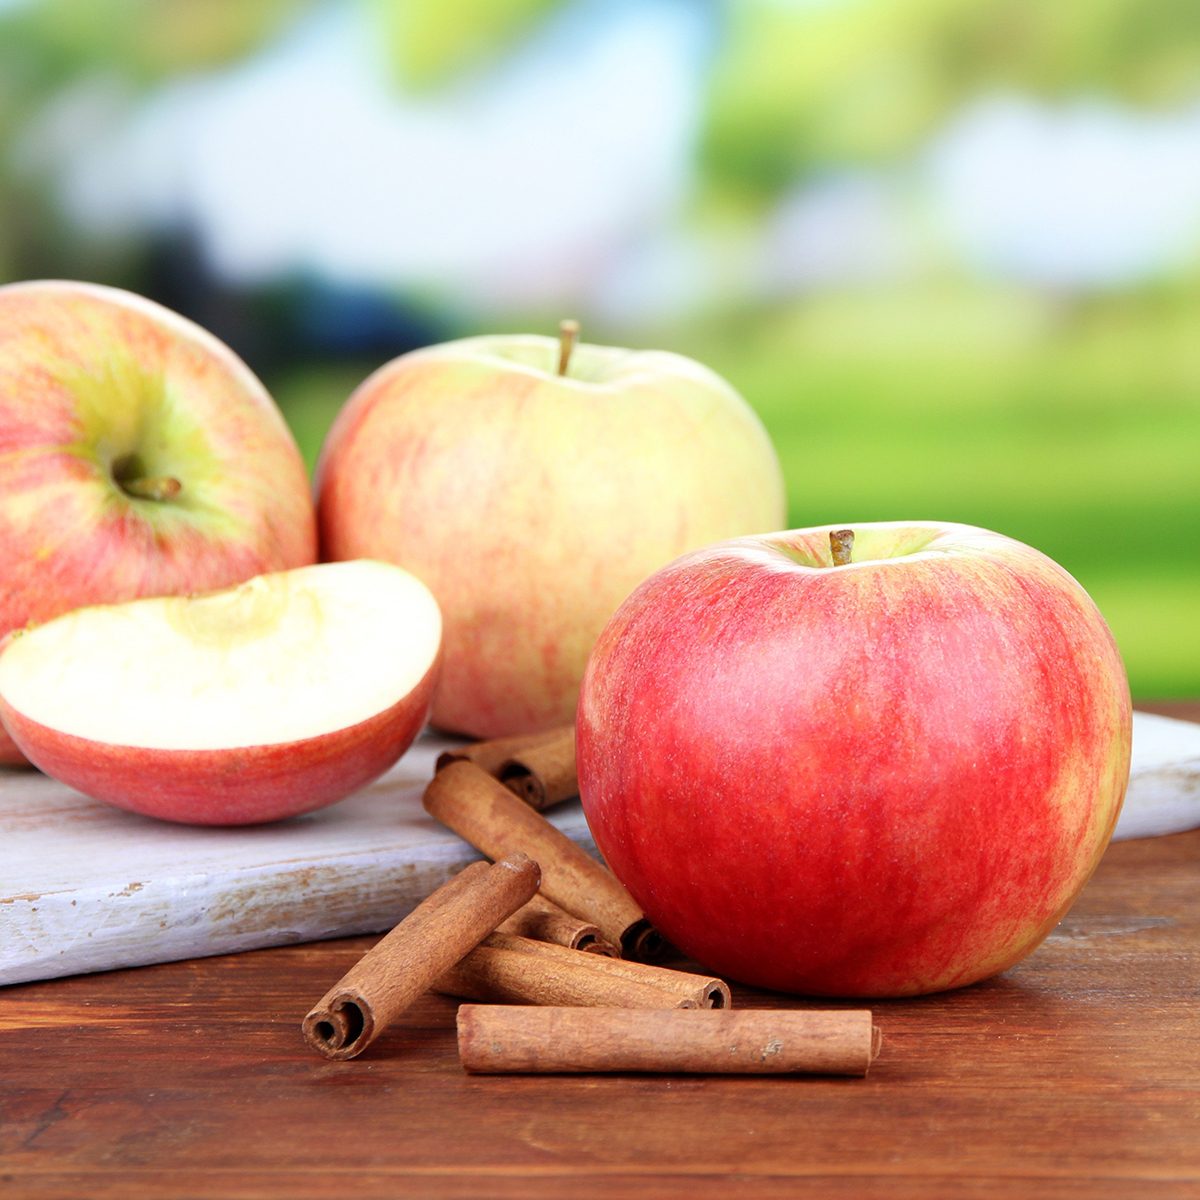 Ripe apples with cinnamon sticks on wooden table, on bright background